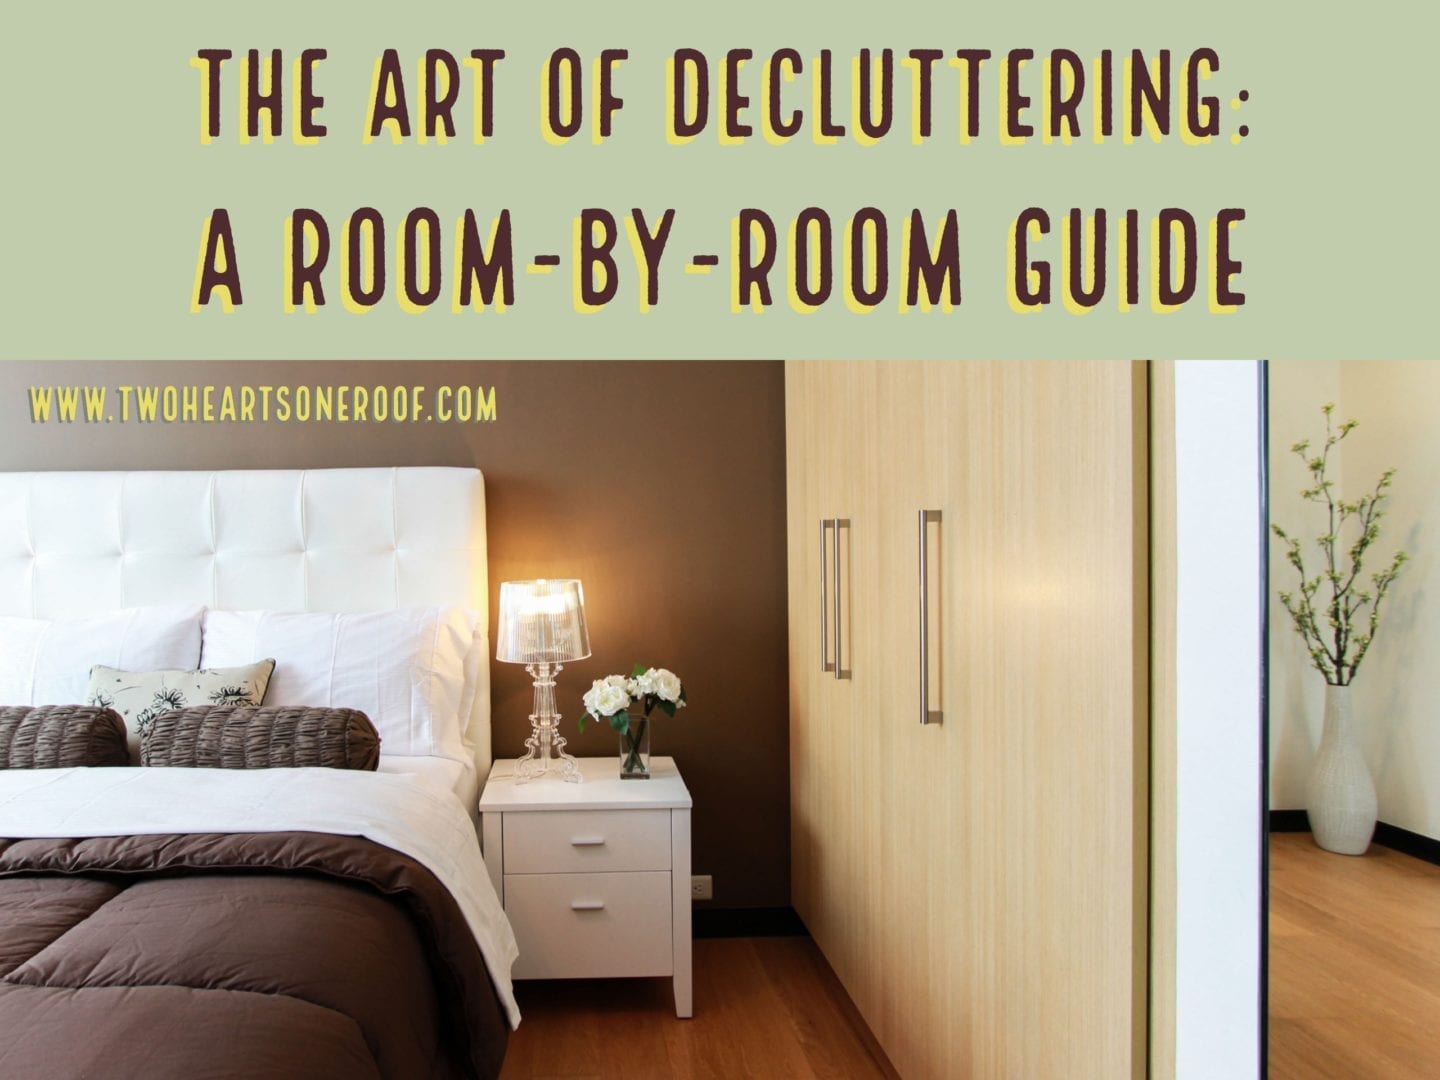 The Art of Decluttering: A Room-by-Room Guide